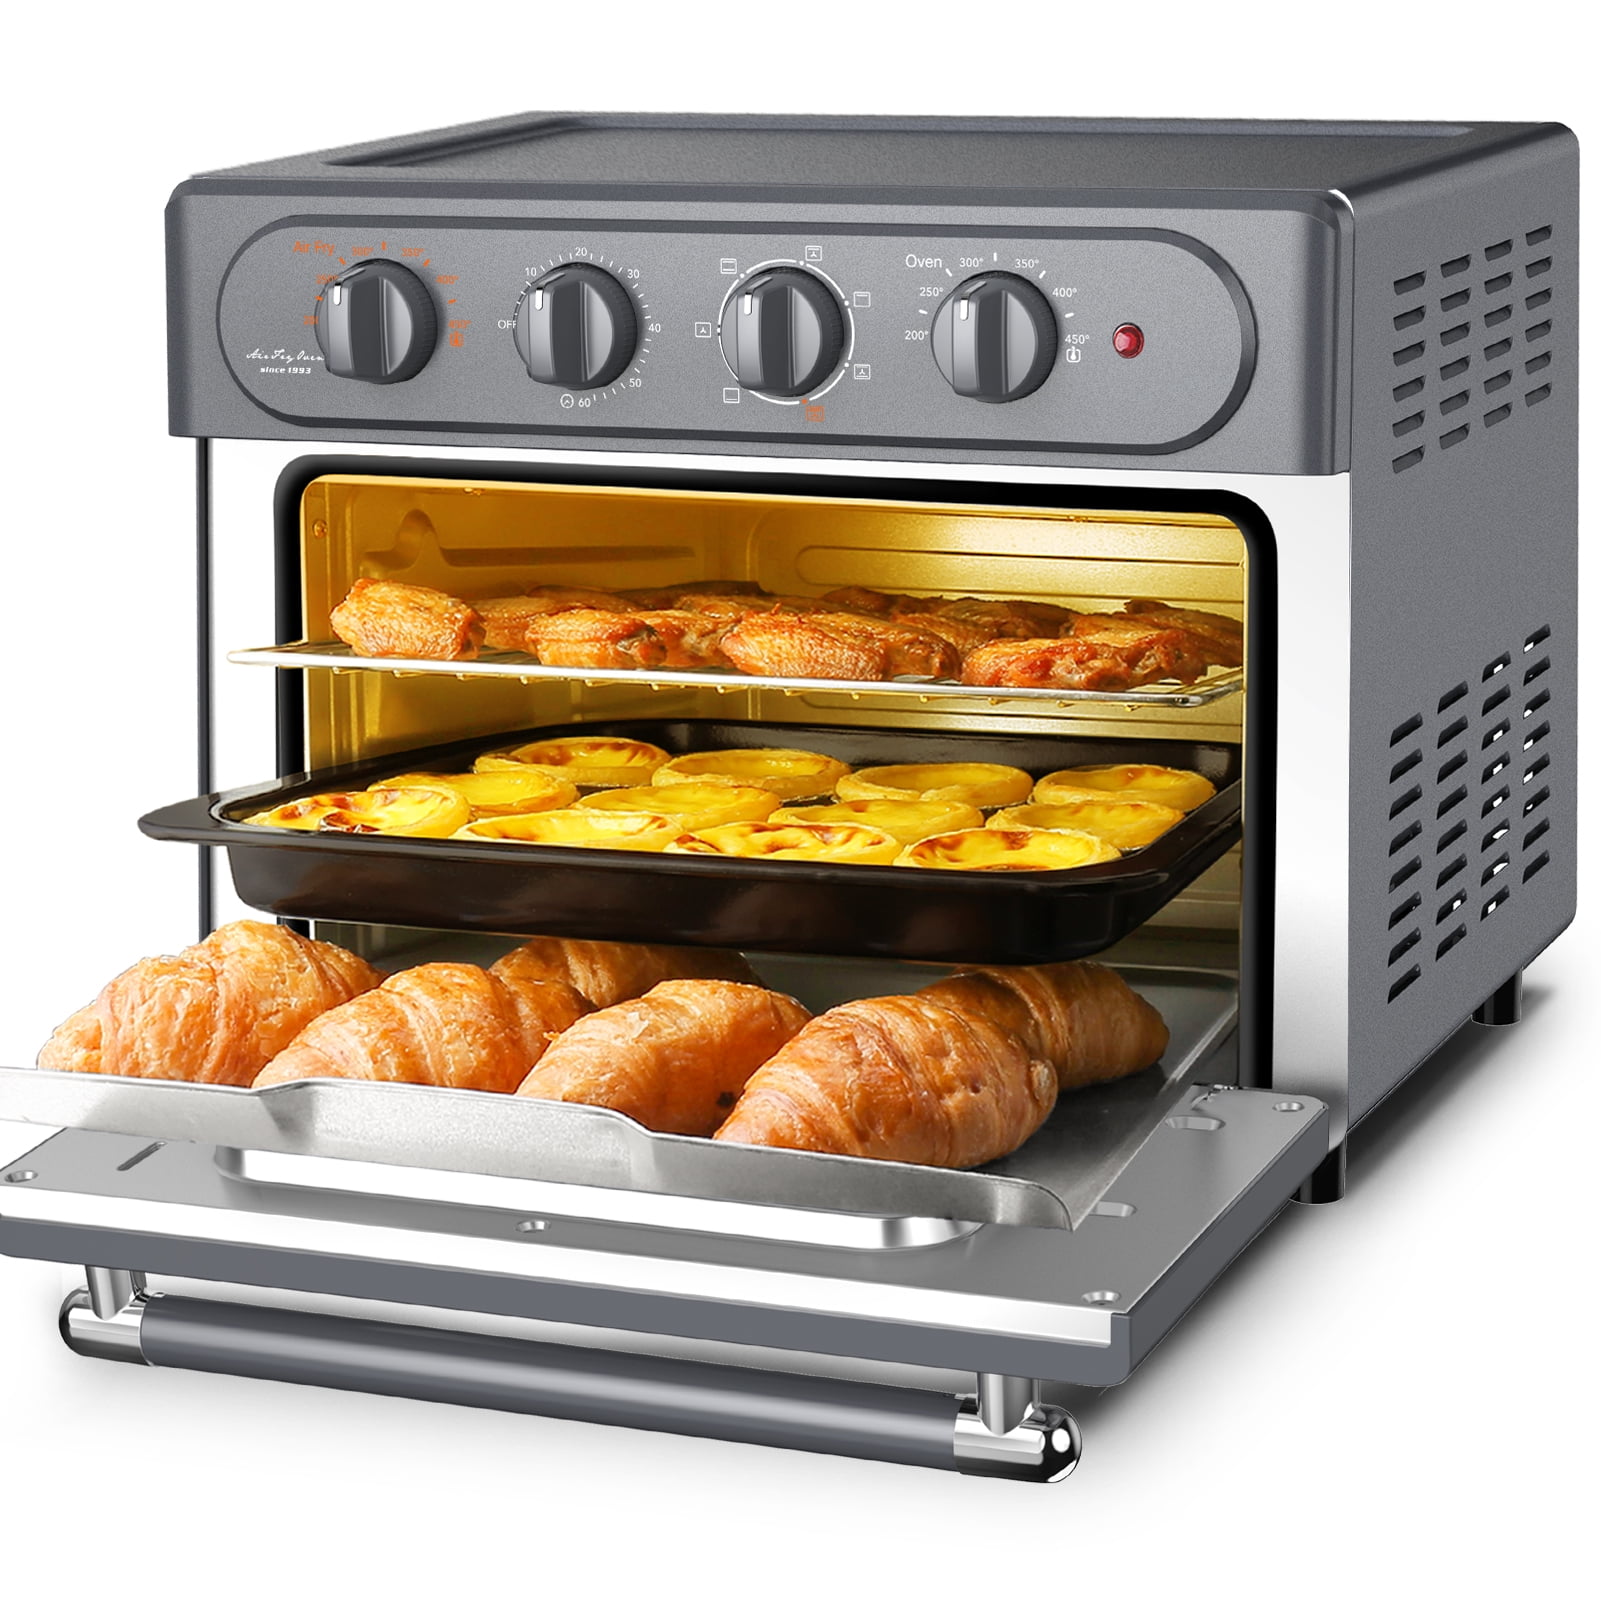 7-In-1 Multifunction Toaster Oven with Warm Broil Toast Bake Air Fryer  Function, 1 Unit - Kroger